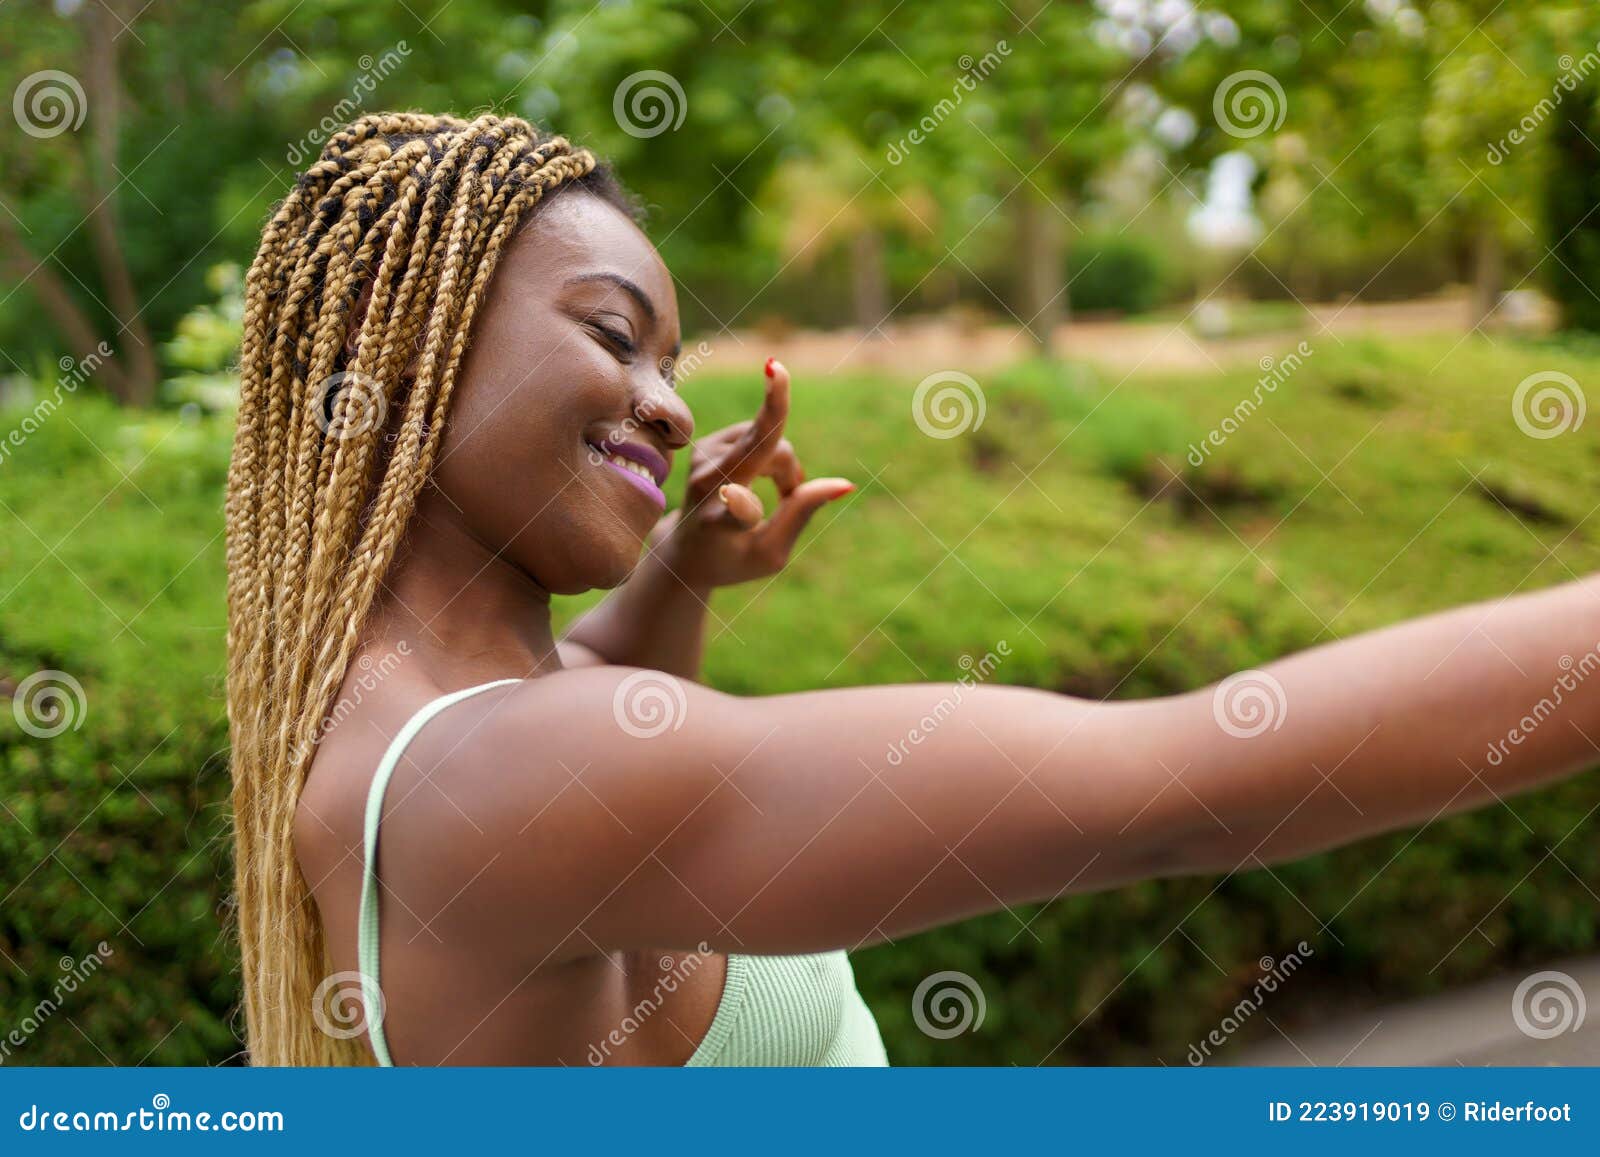 Close-up View Of An African-American Woman With Closed Eyes Taking A Selfie Doing Peace Sign ...